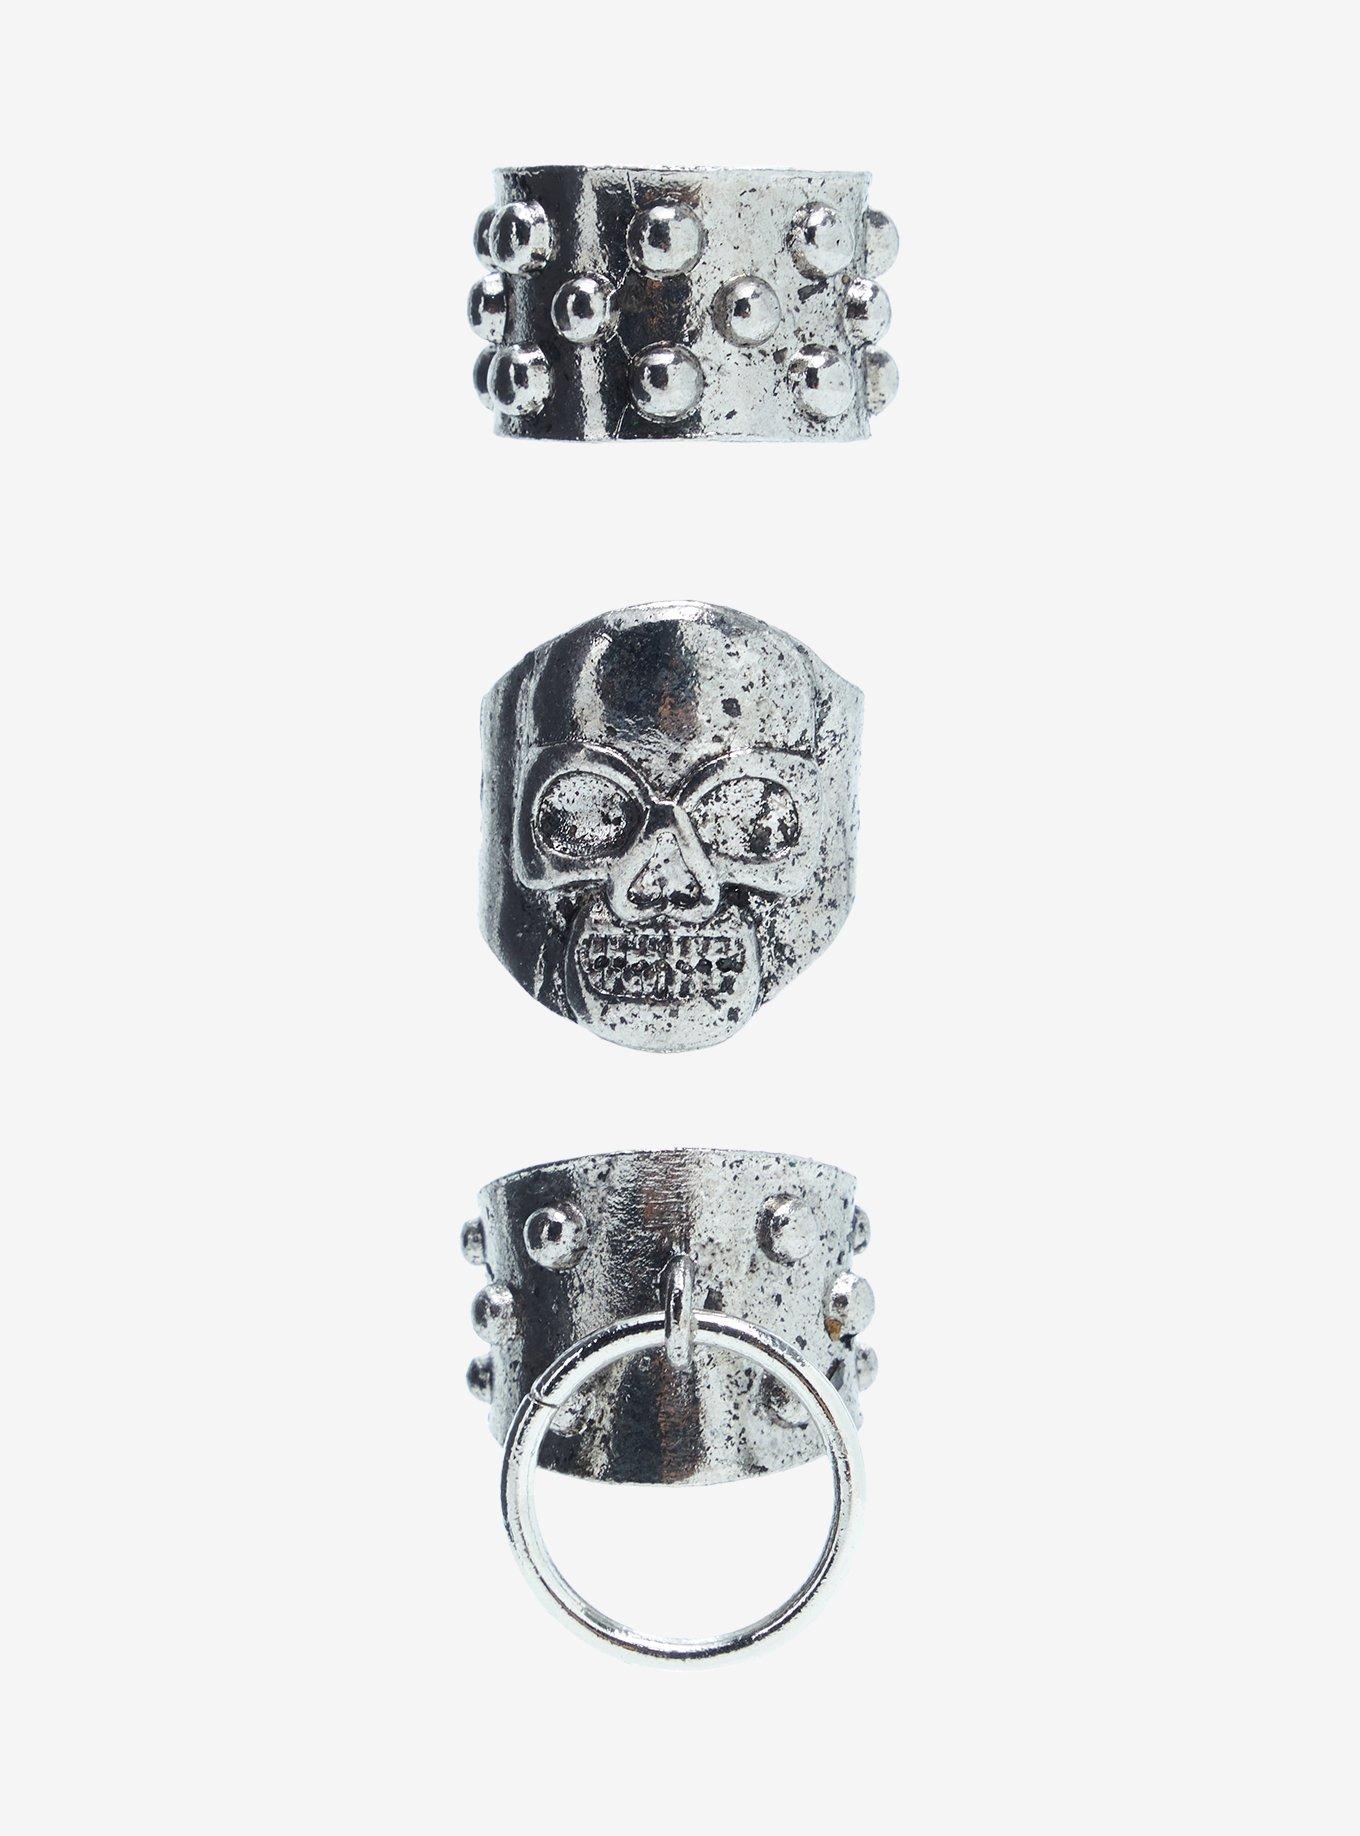 Hot Topic Social Collision® Punk Skull Ring Set | CoolSprings Galleria